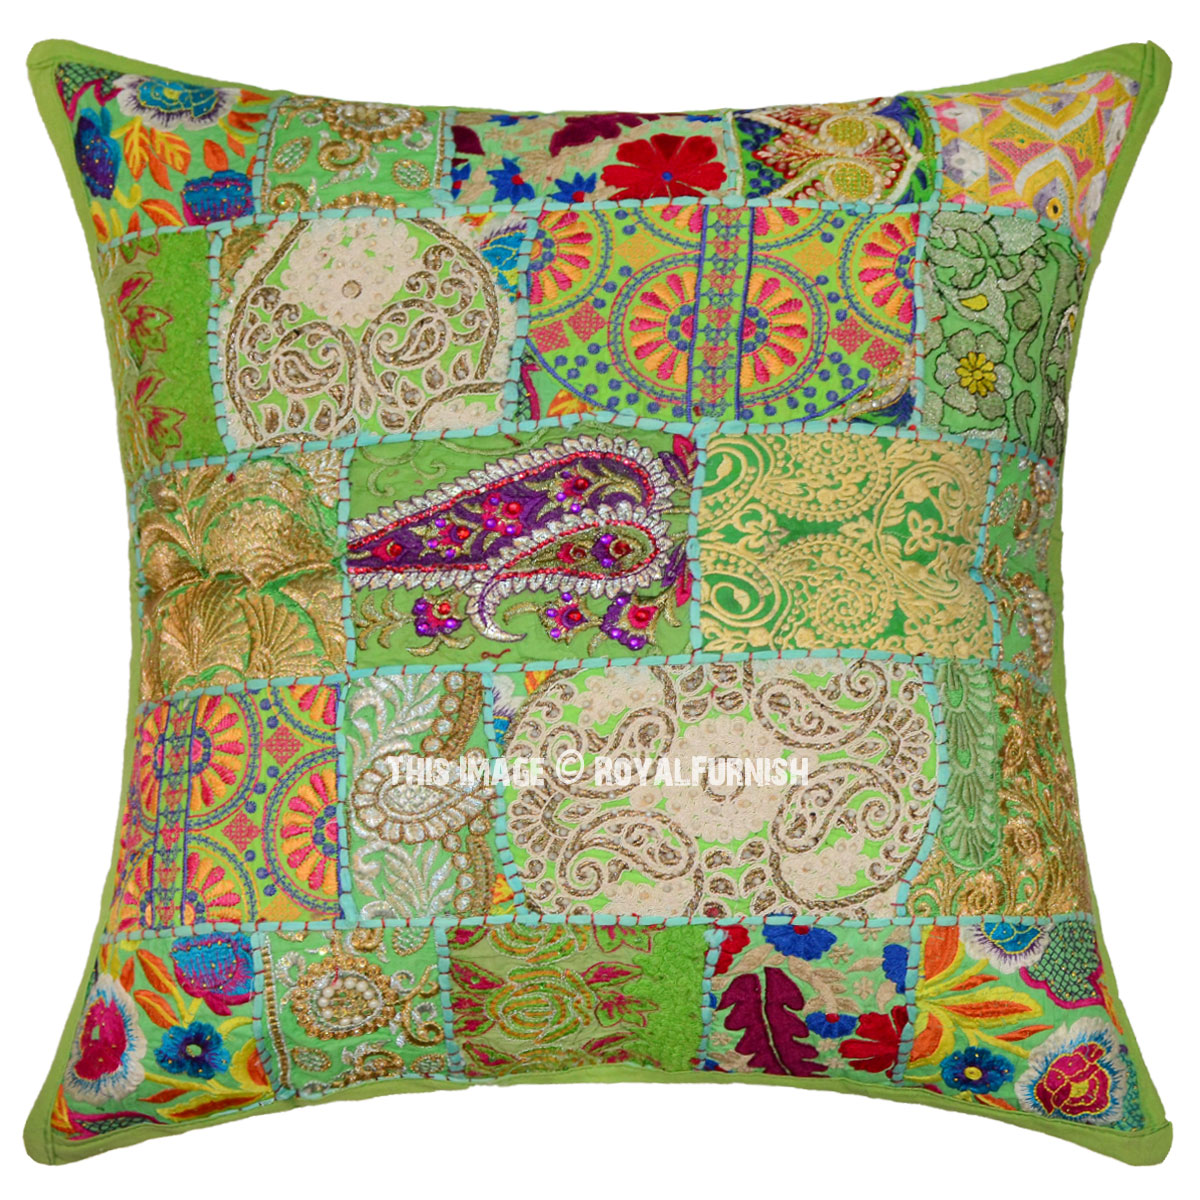 Details about  / 16/" DUPIONI SILK EMBROIDERED PAISLEY PILLOW CUSHION COVER Throw Indian Decor